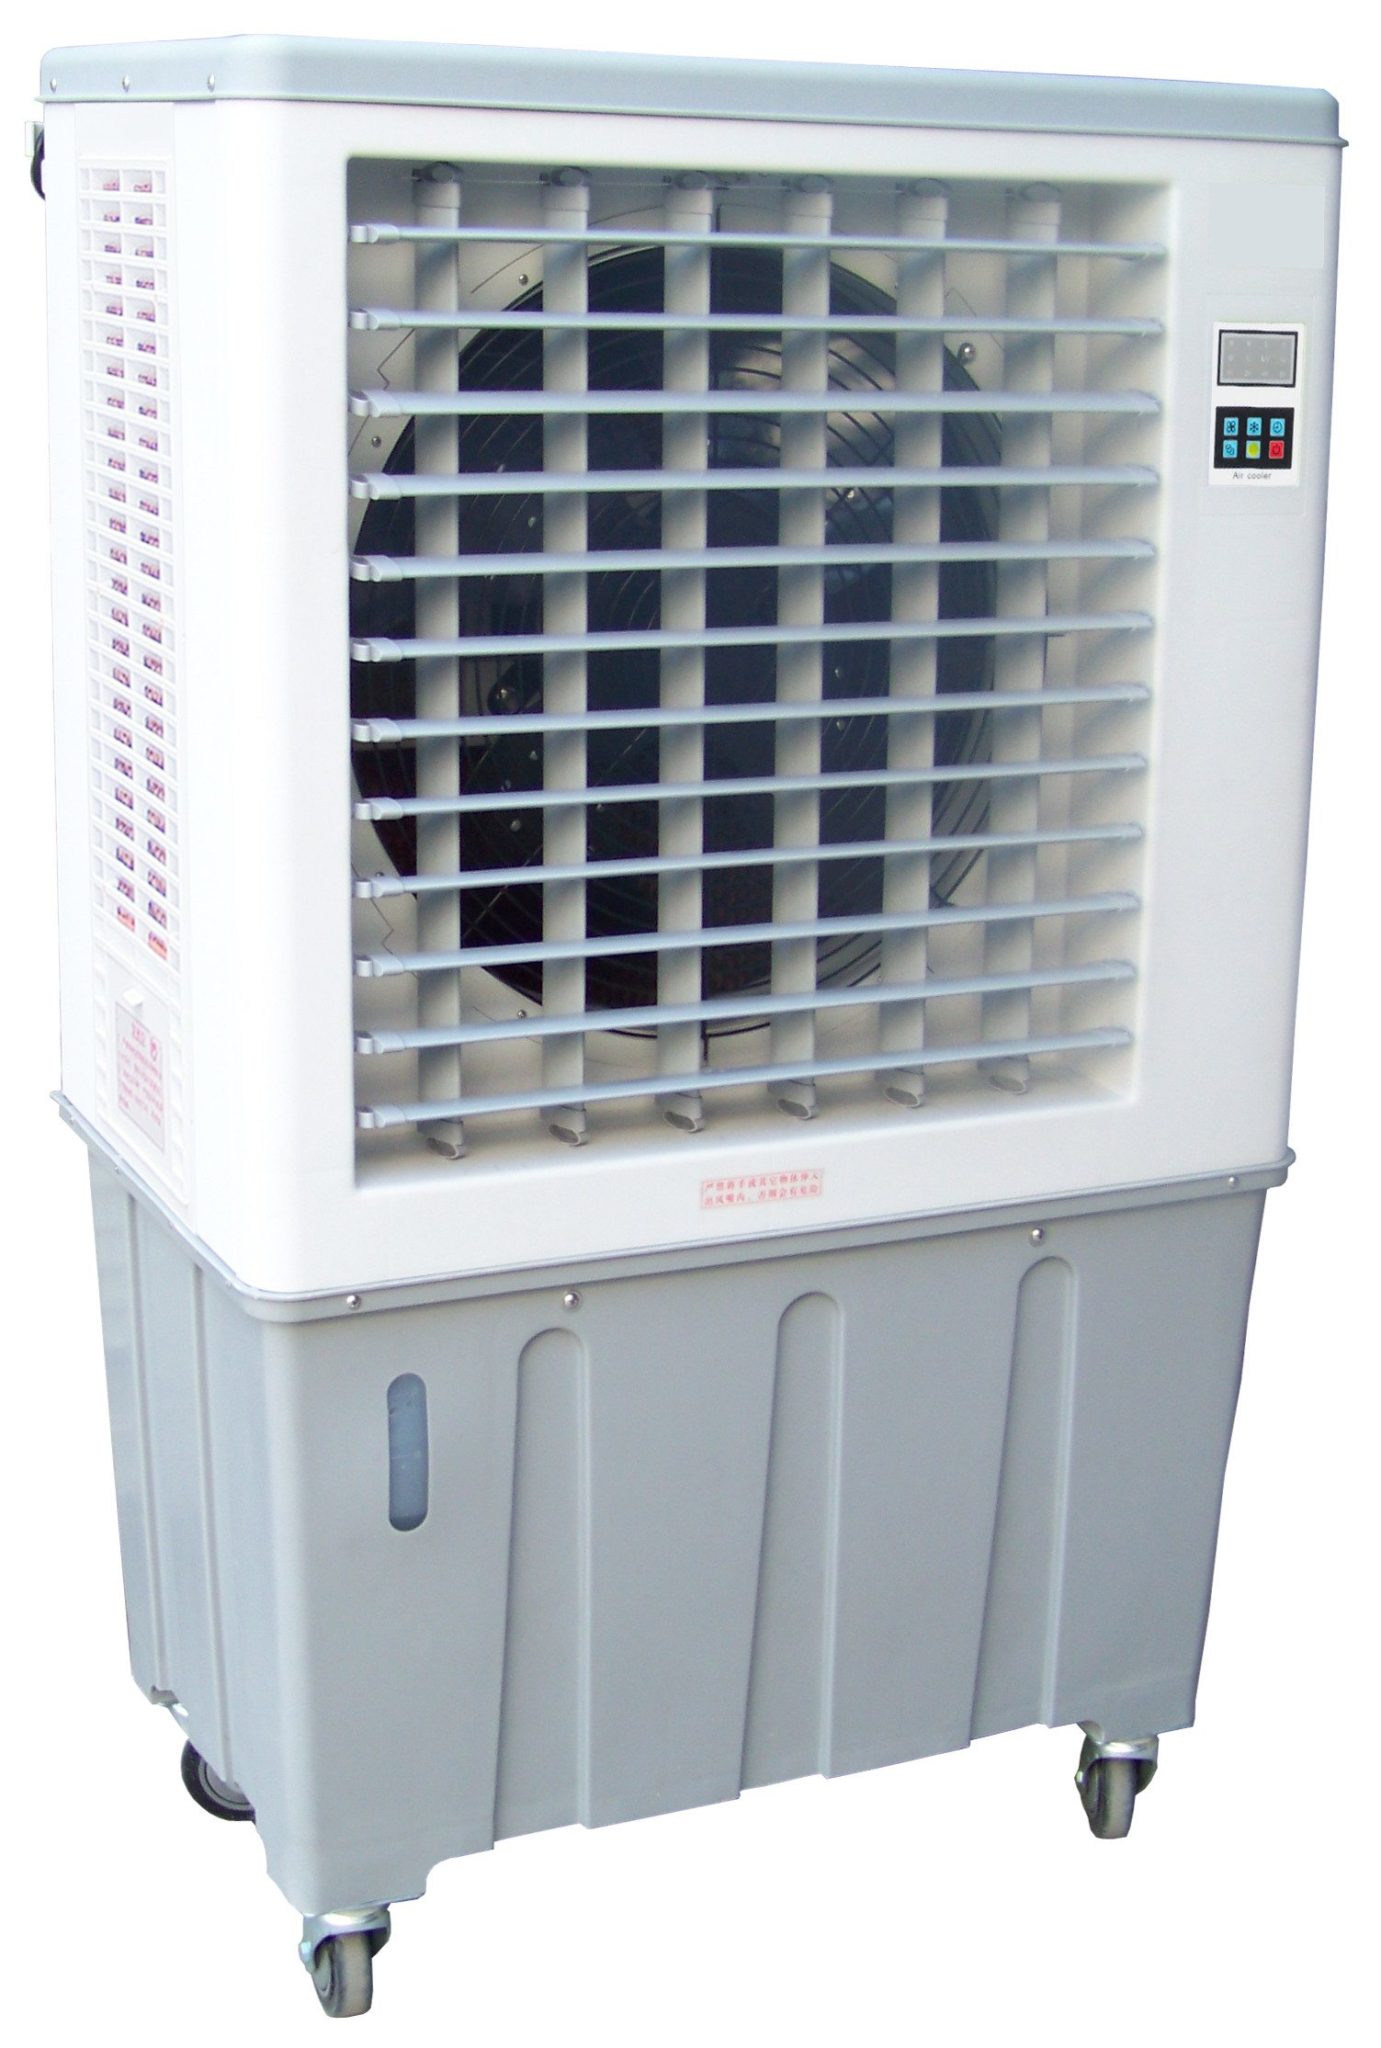 PORTABLE EVAPORATIVE AIR COOLER 280W - PAC280-A / Industrial Heating Cooling Ventilation Distribution Fans Warehouse Australia / Fanmaster